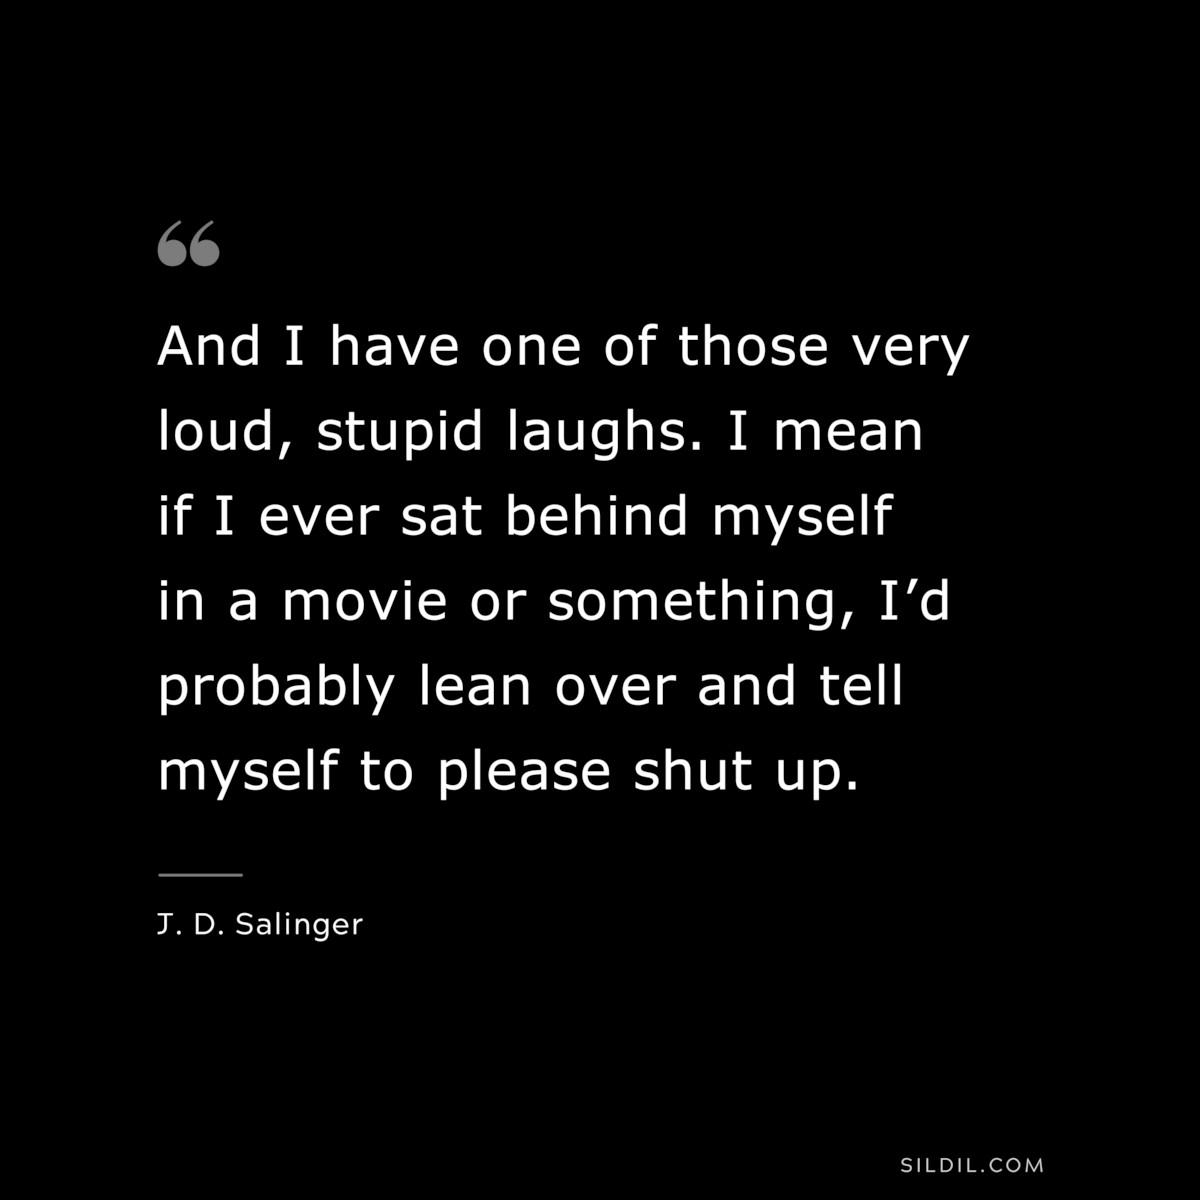 And I have one of those very loud, stupid laughs. I mean if I ever sat behind myself in a movie or something, I’d probably lean over and tell myself to please shut up. — J. D. Salinger